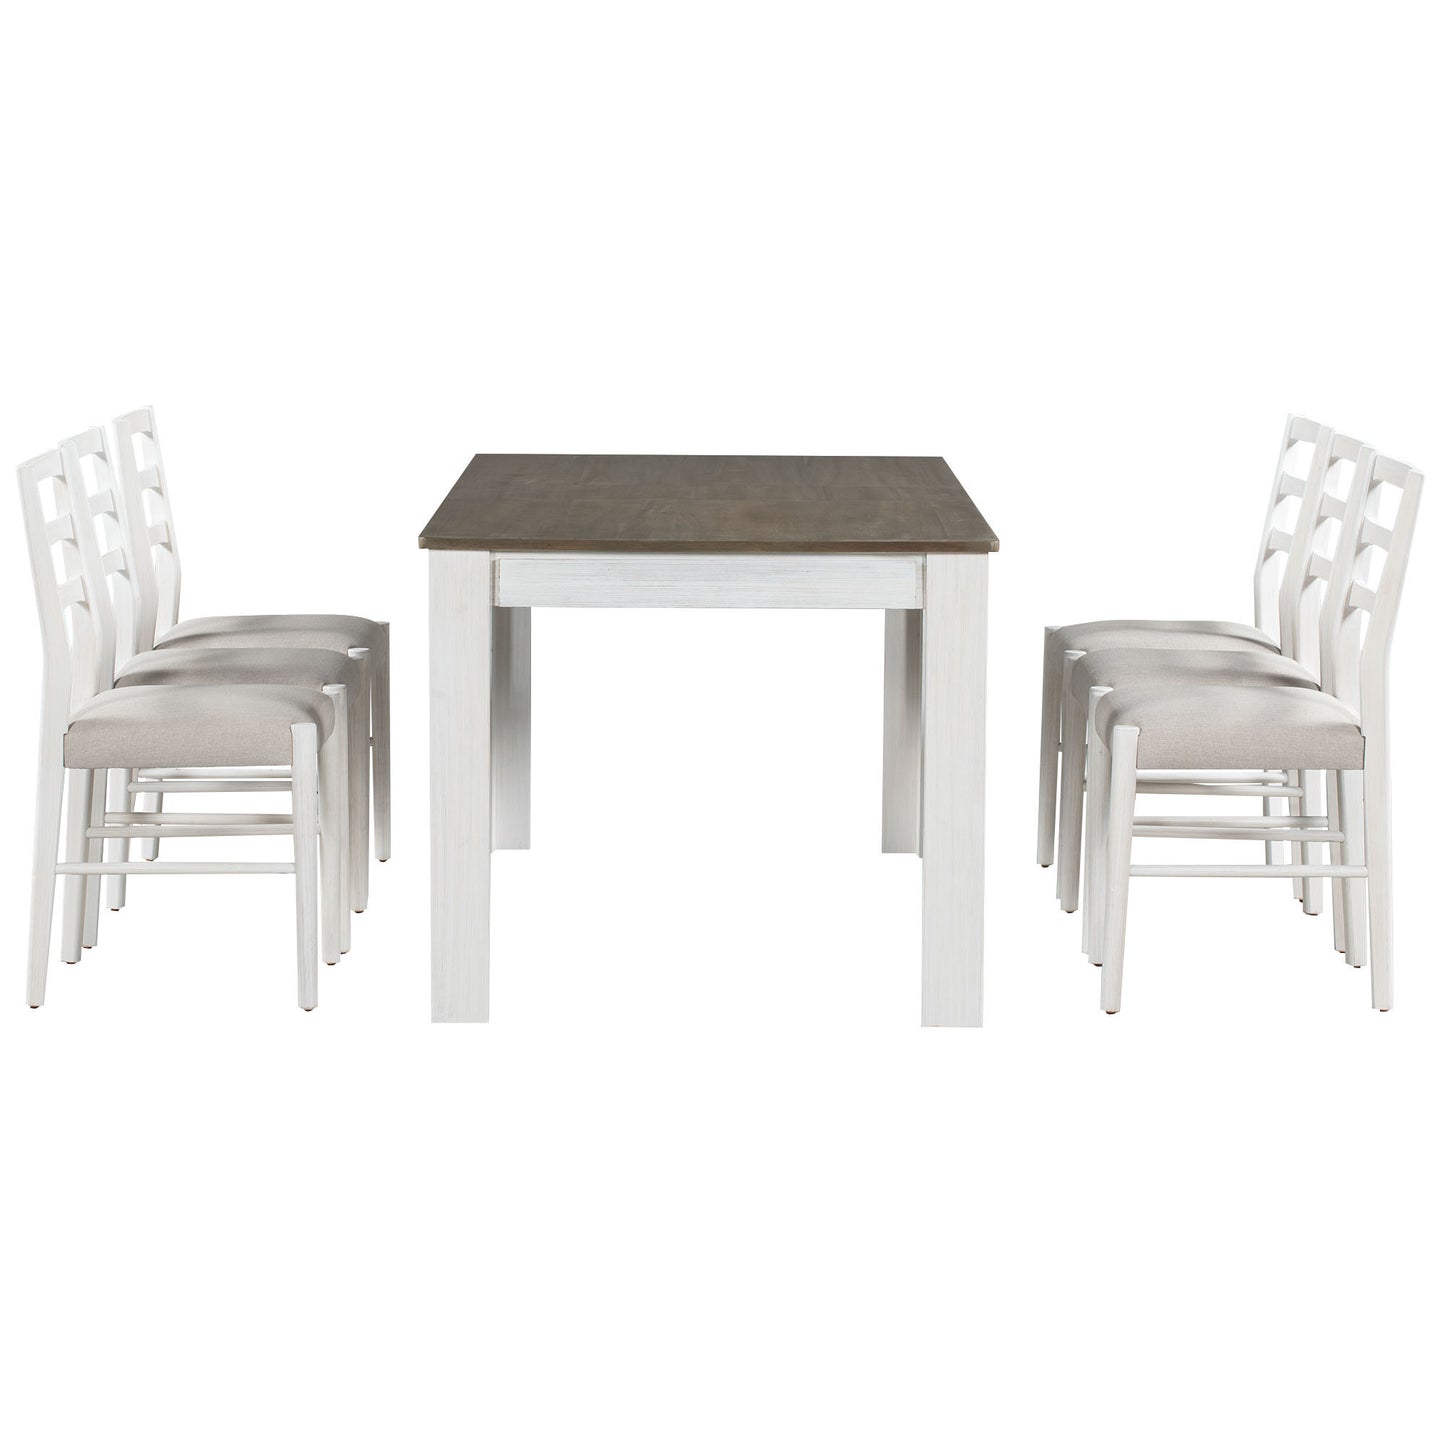 TREXM 7-Piece Wooden Dining Table Set Brown + White